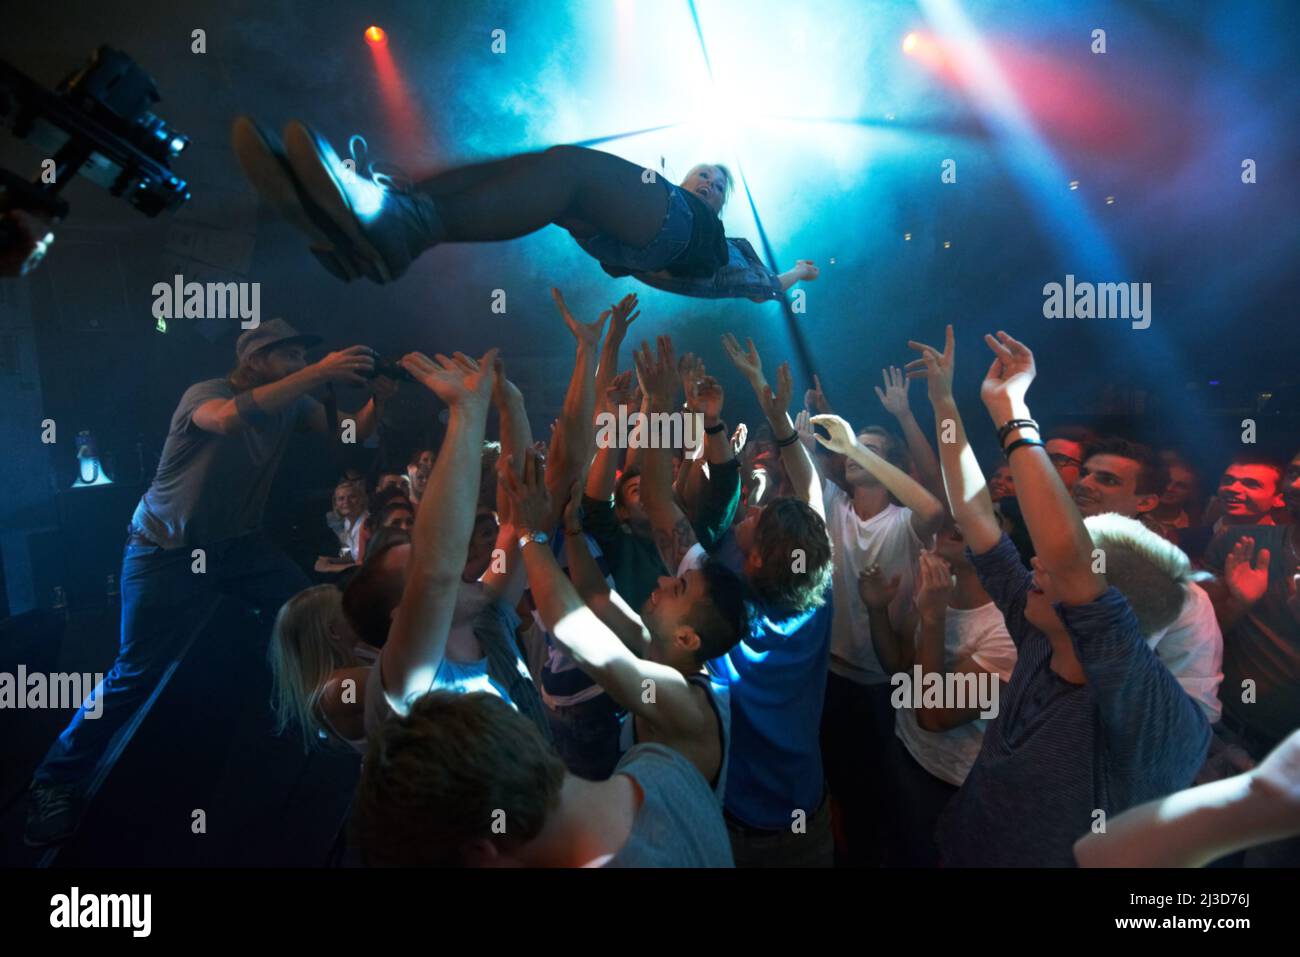 Falling into the crowd. A band playing on stage at a concert- This concert was created for the sole purpose of this photo shoot, featuring 300 models Stock Photo